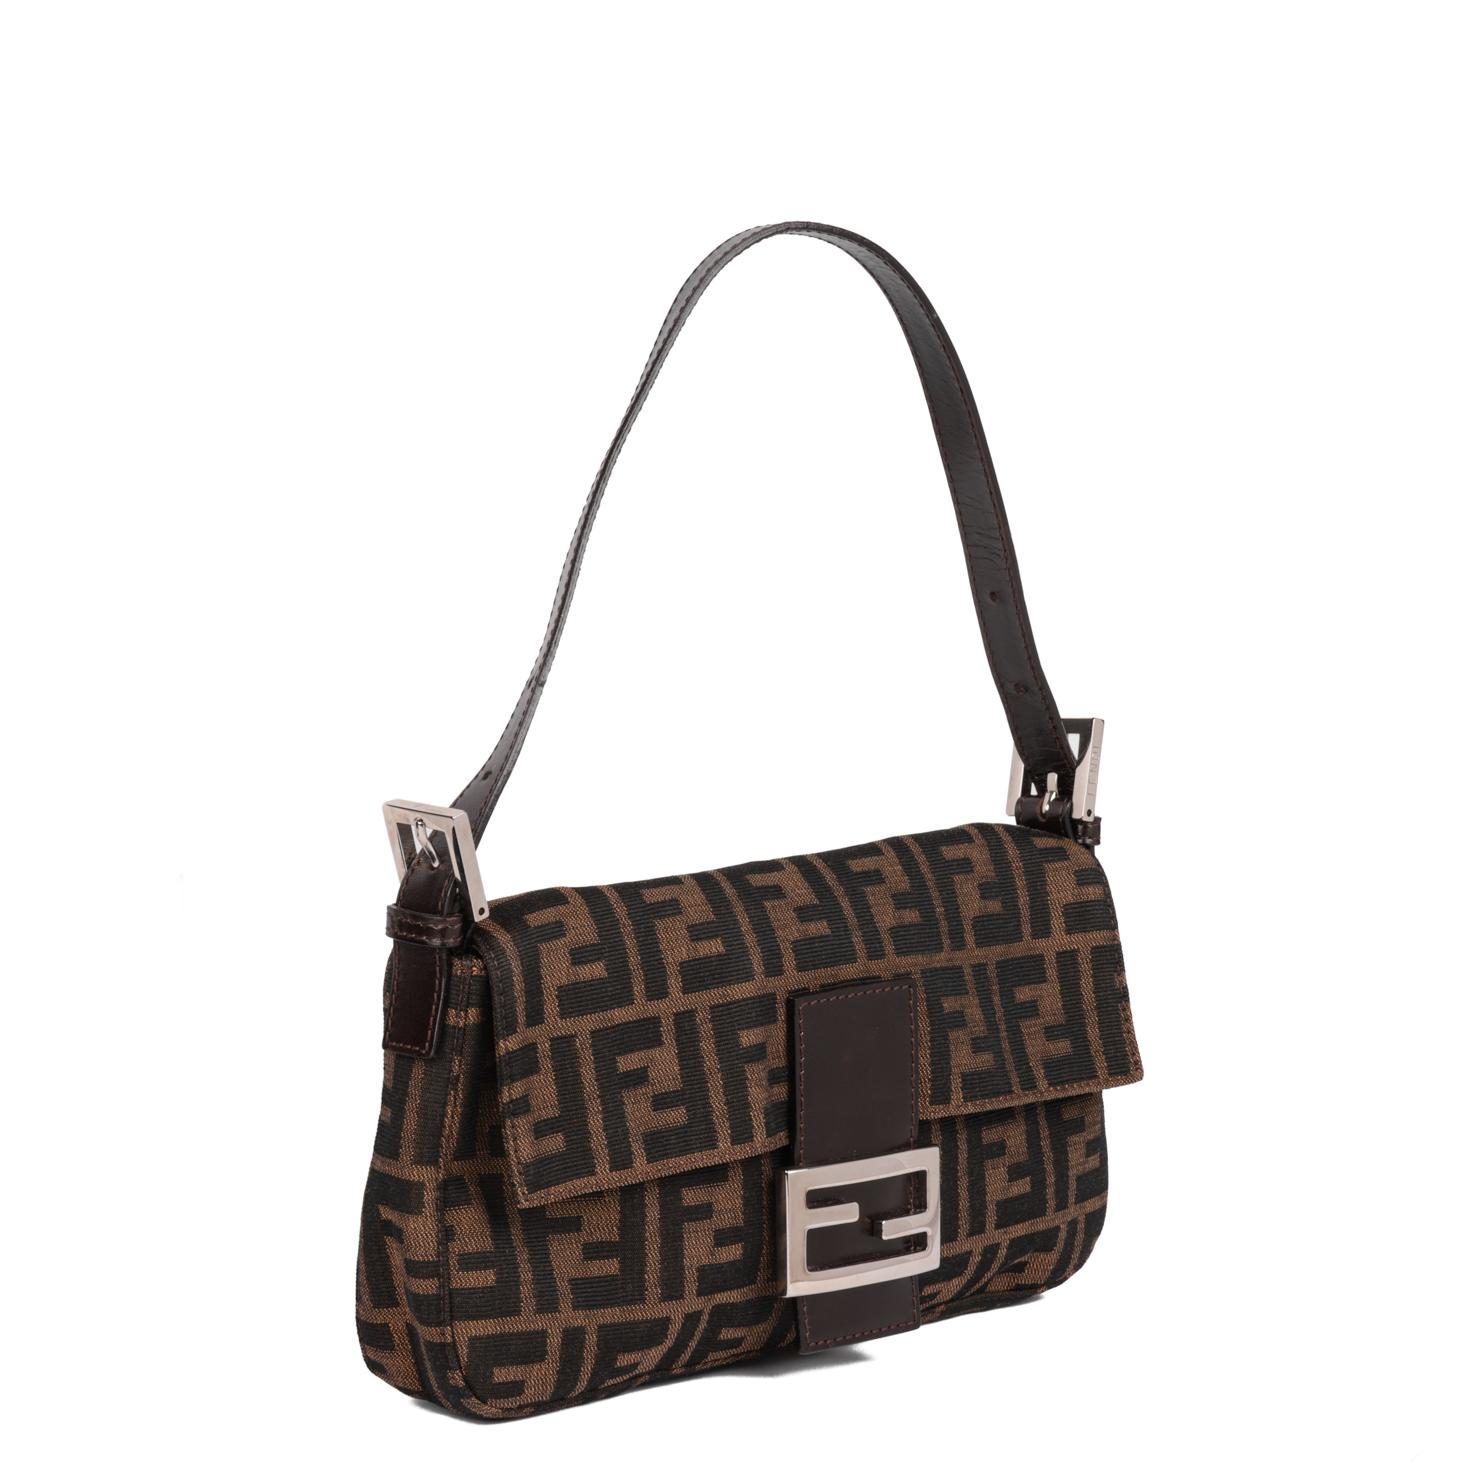 FENDI
Brown Zucca Canvas & Calfskin Leather Vintage Baguette

Xupes Reference: CB854
Serial Number: 2211 26424 99
Age (Circa): 2000
Authenticity Details: Date Stamp (Made in Italy)
Gender: Ladies
Type: Shoulder, Top Handle

Colour: Brown 
Hardware: